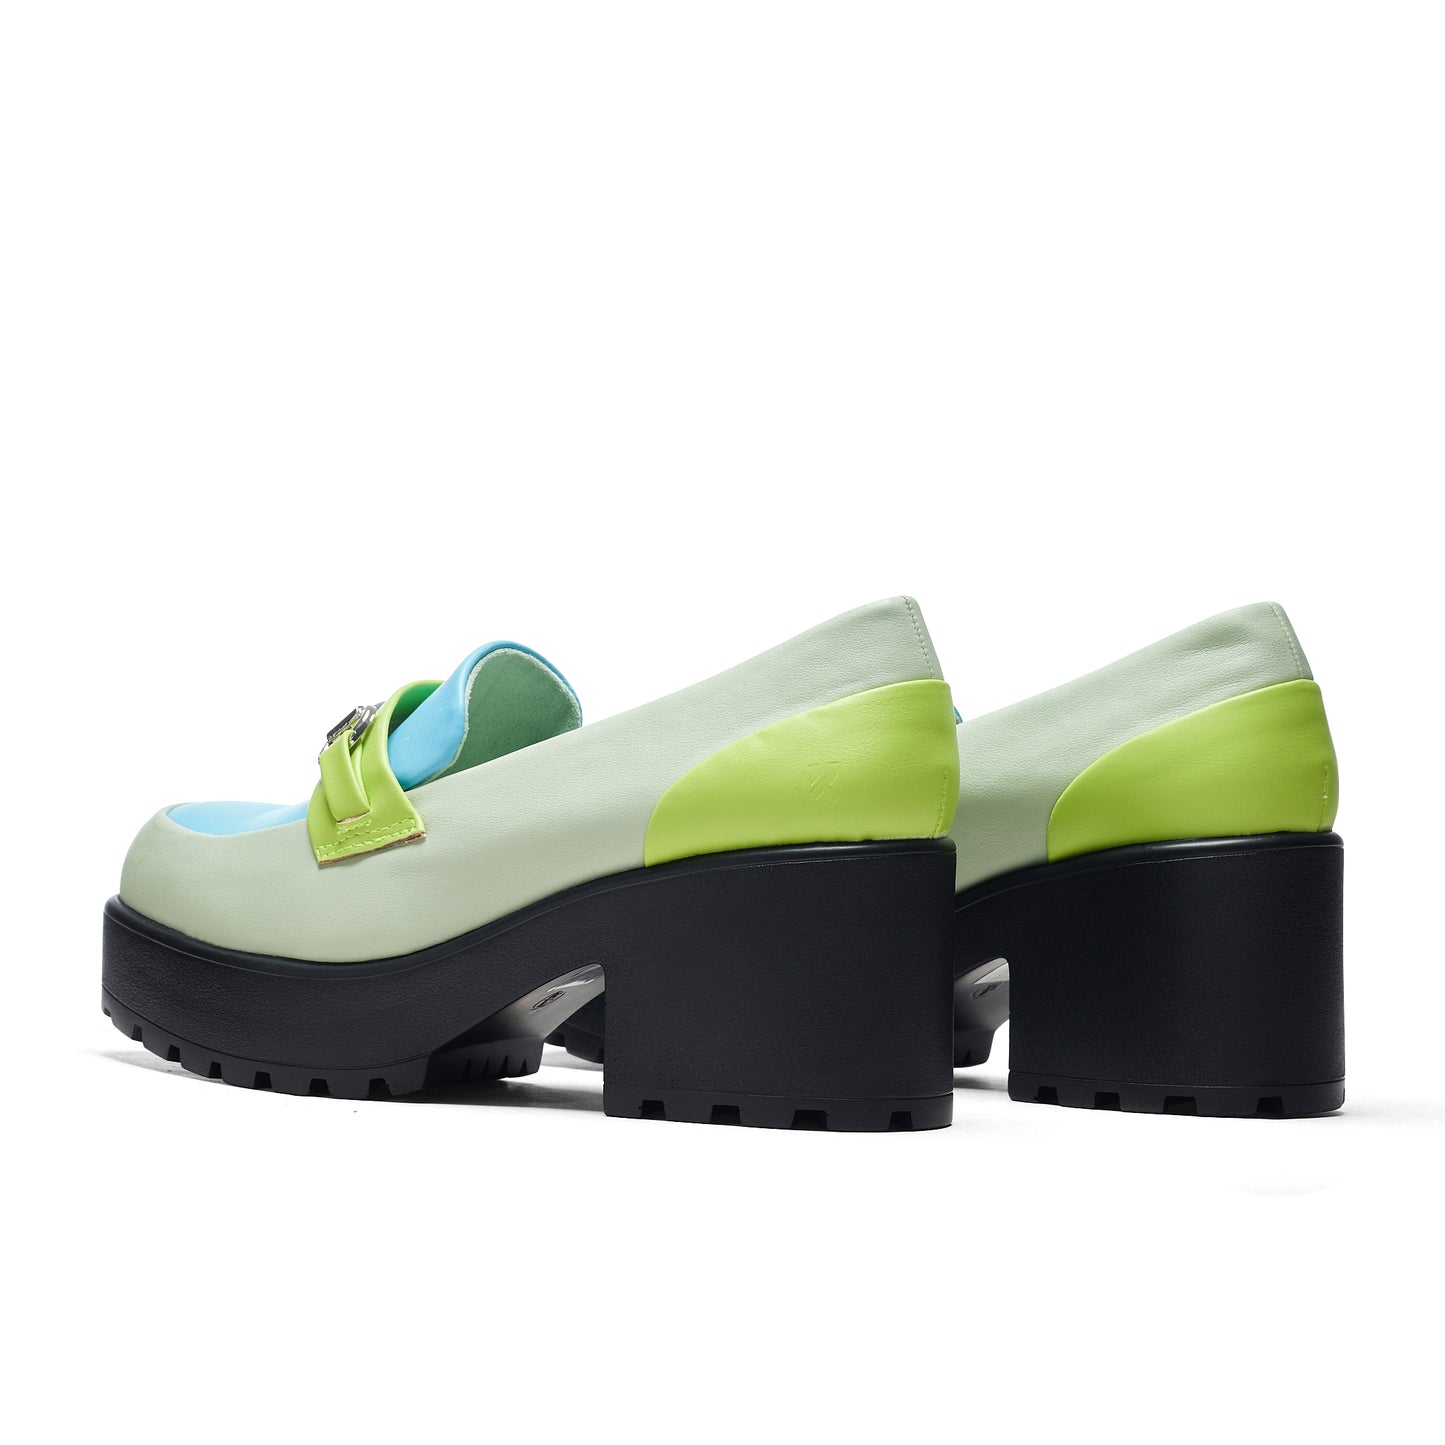 High Class Chunky Shoes - Mint Pastel - Shoes - KOI Footwear - Green - Back View